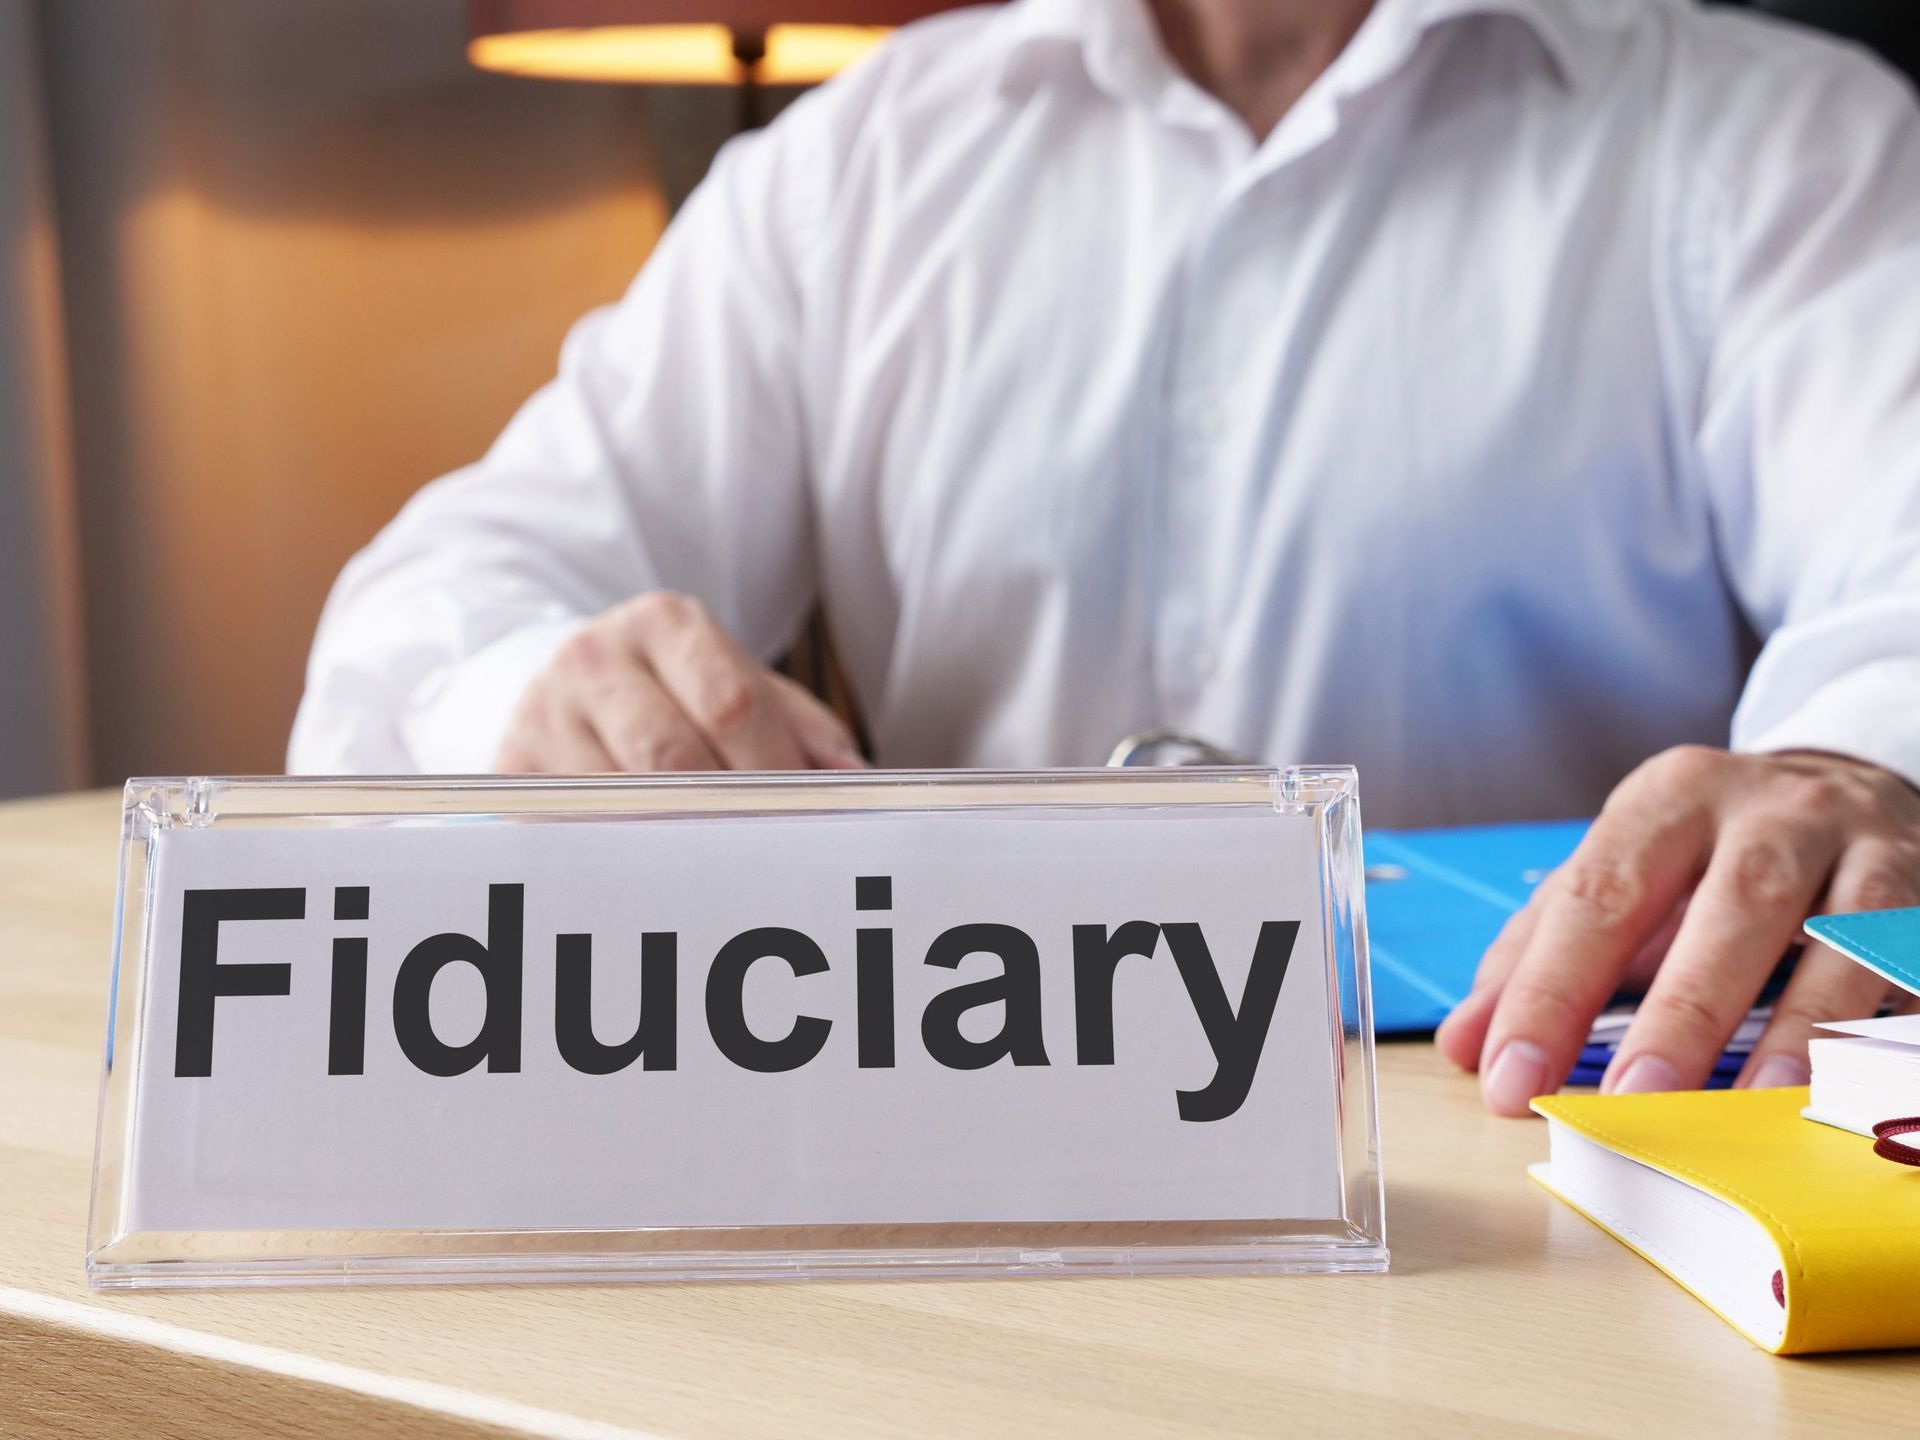 fiduciary shown on conceptual business